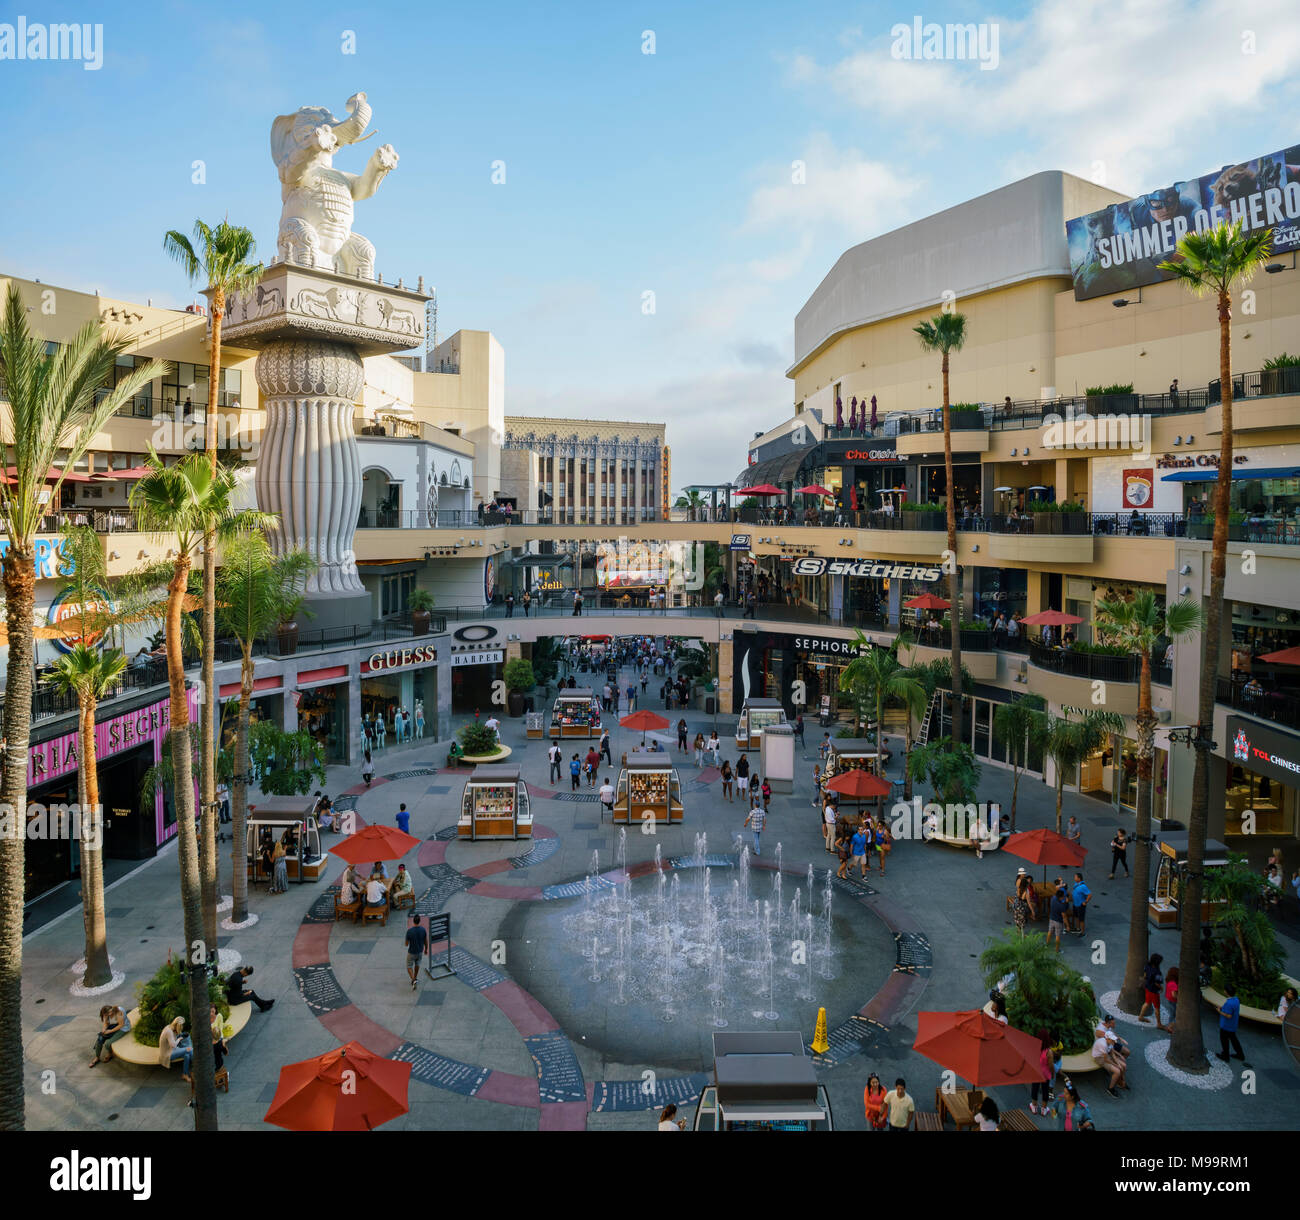 Los Angeles, JUN 23: Big plaza in the famous Hollywood area on JUN 23, 2017 at Los Angeles, California Stock Photo